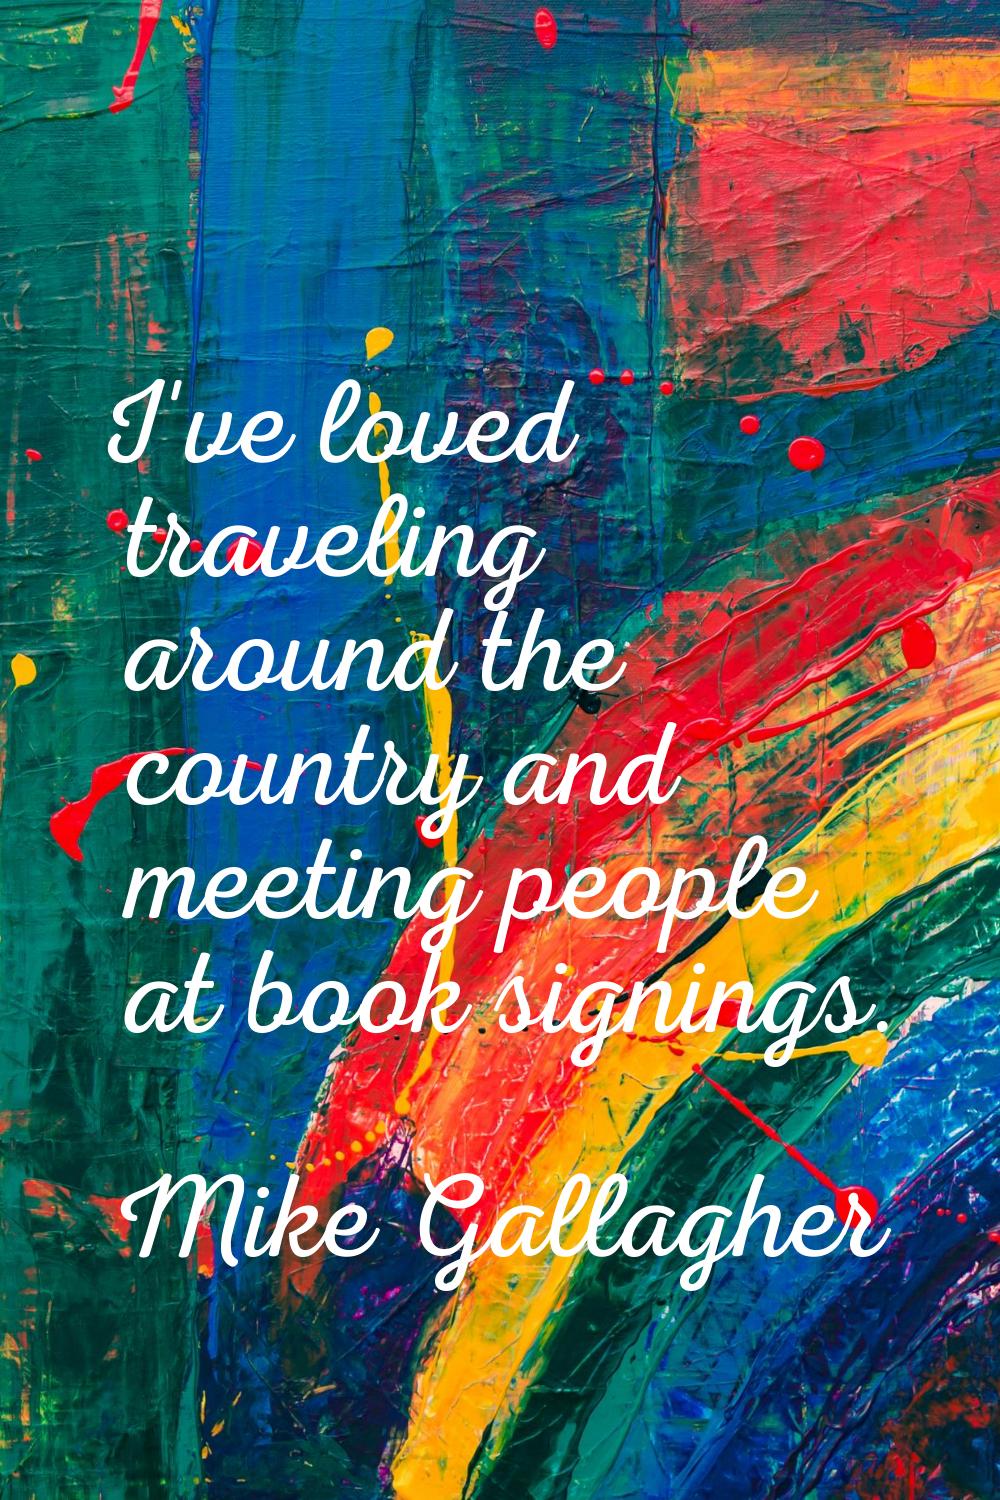 I've loved traveling around the country and meeting people at book signings.